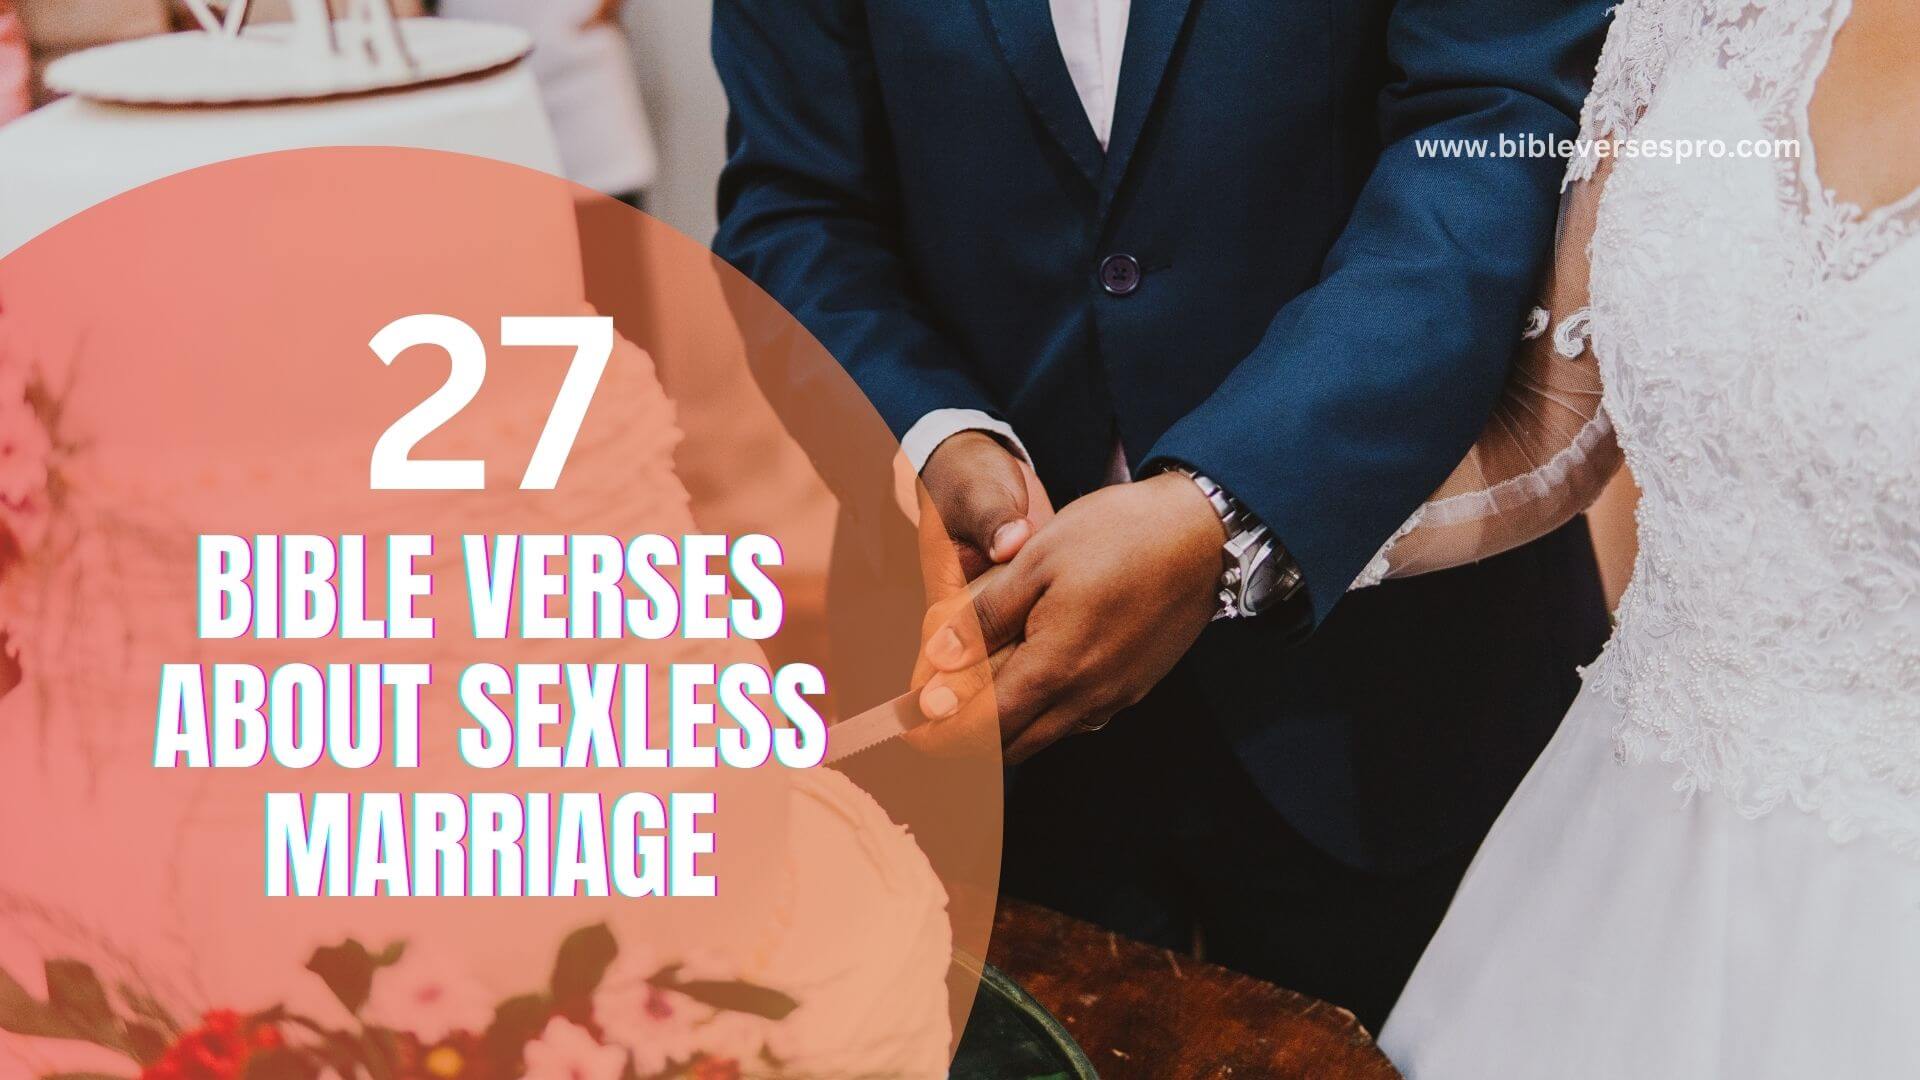 BIBLE VERSES ABOUT SEXLESS MARRIAGE (1)